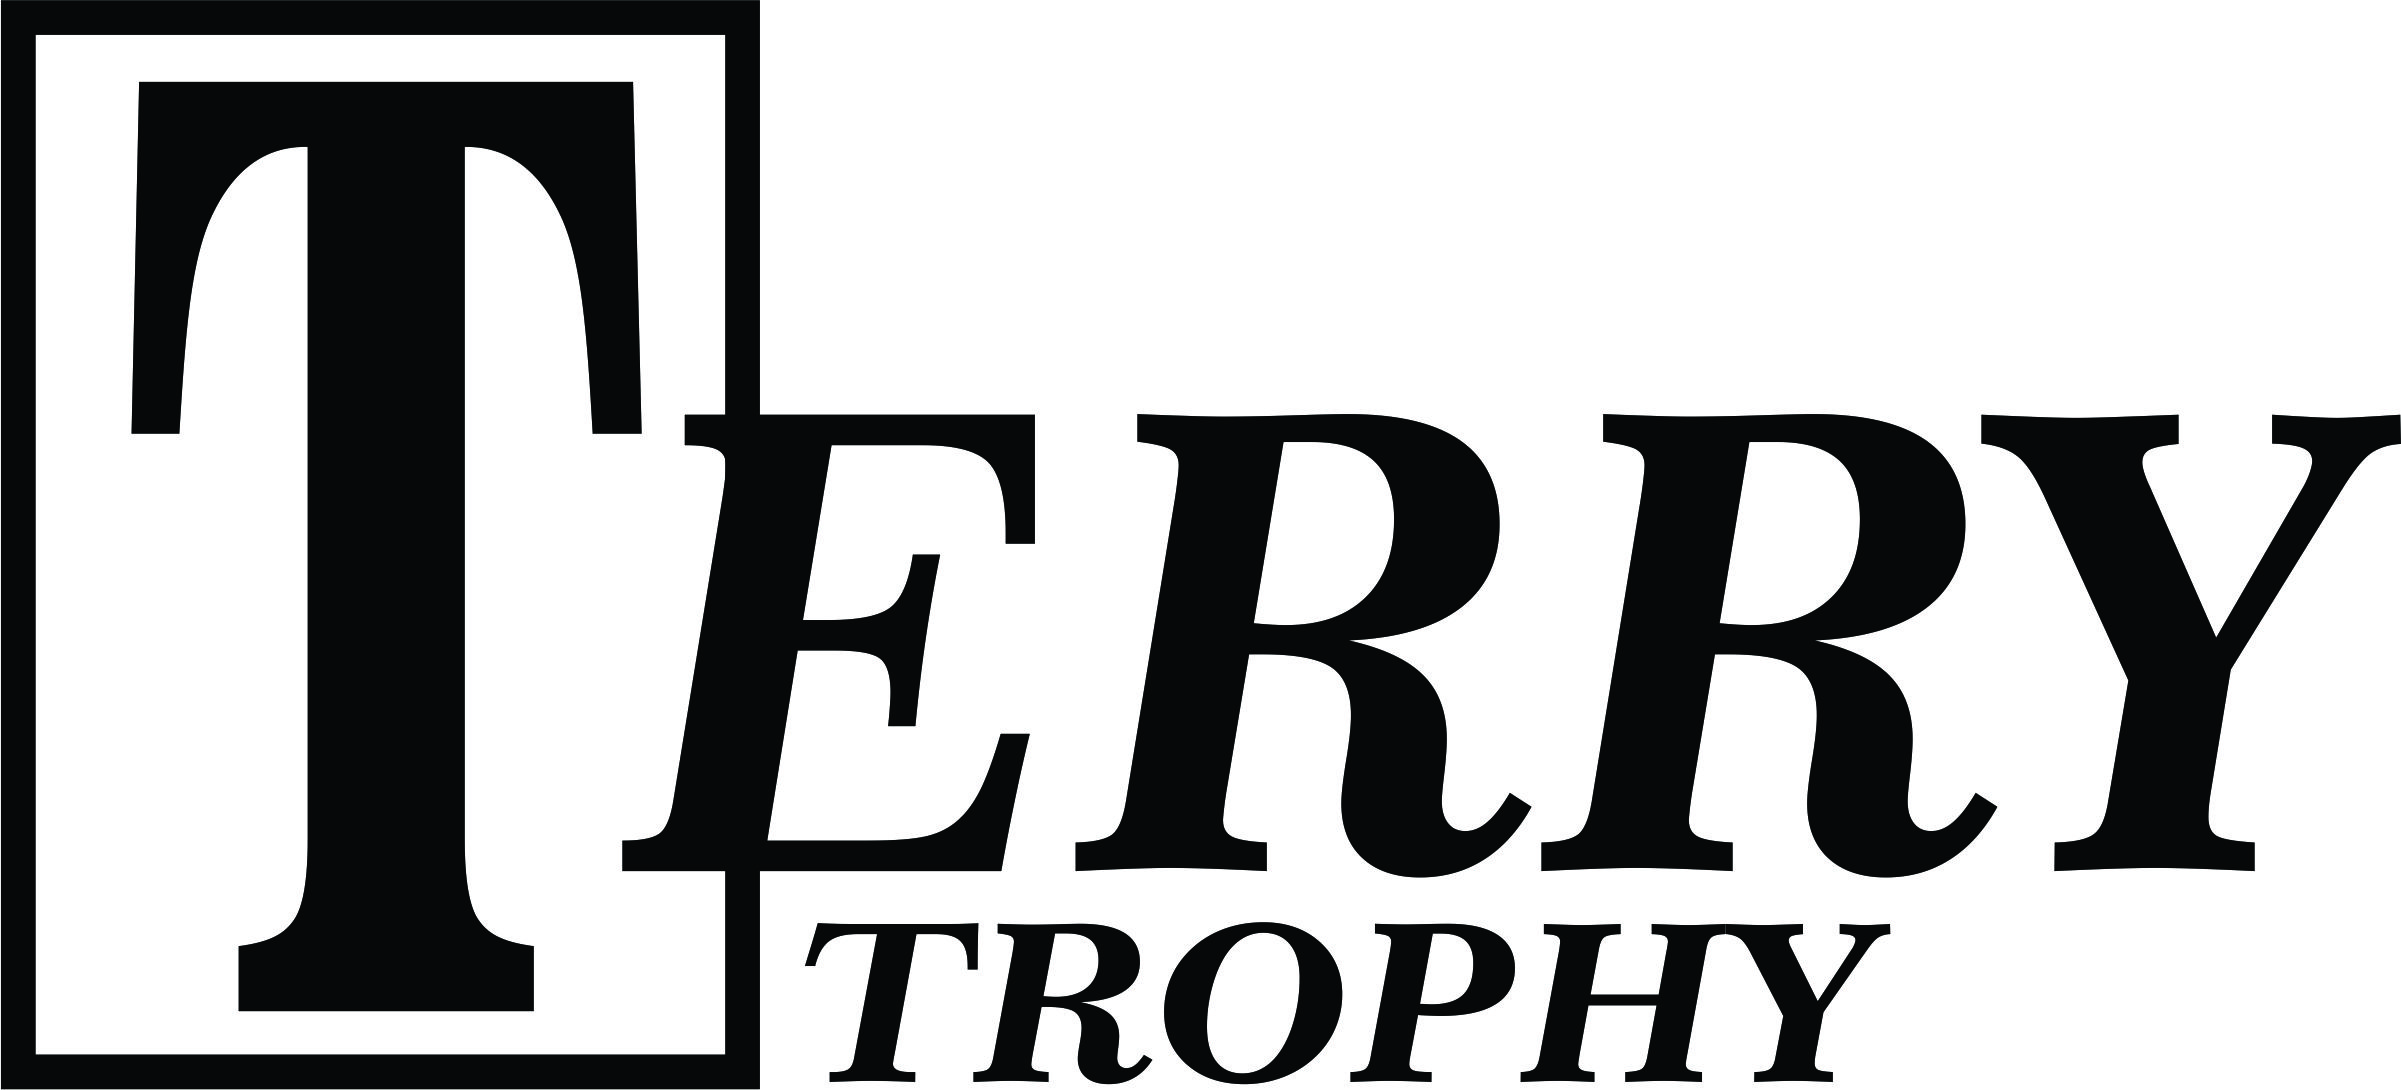 terry trophy logo image - 2018